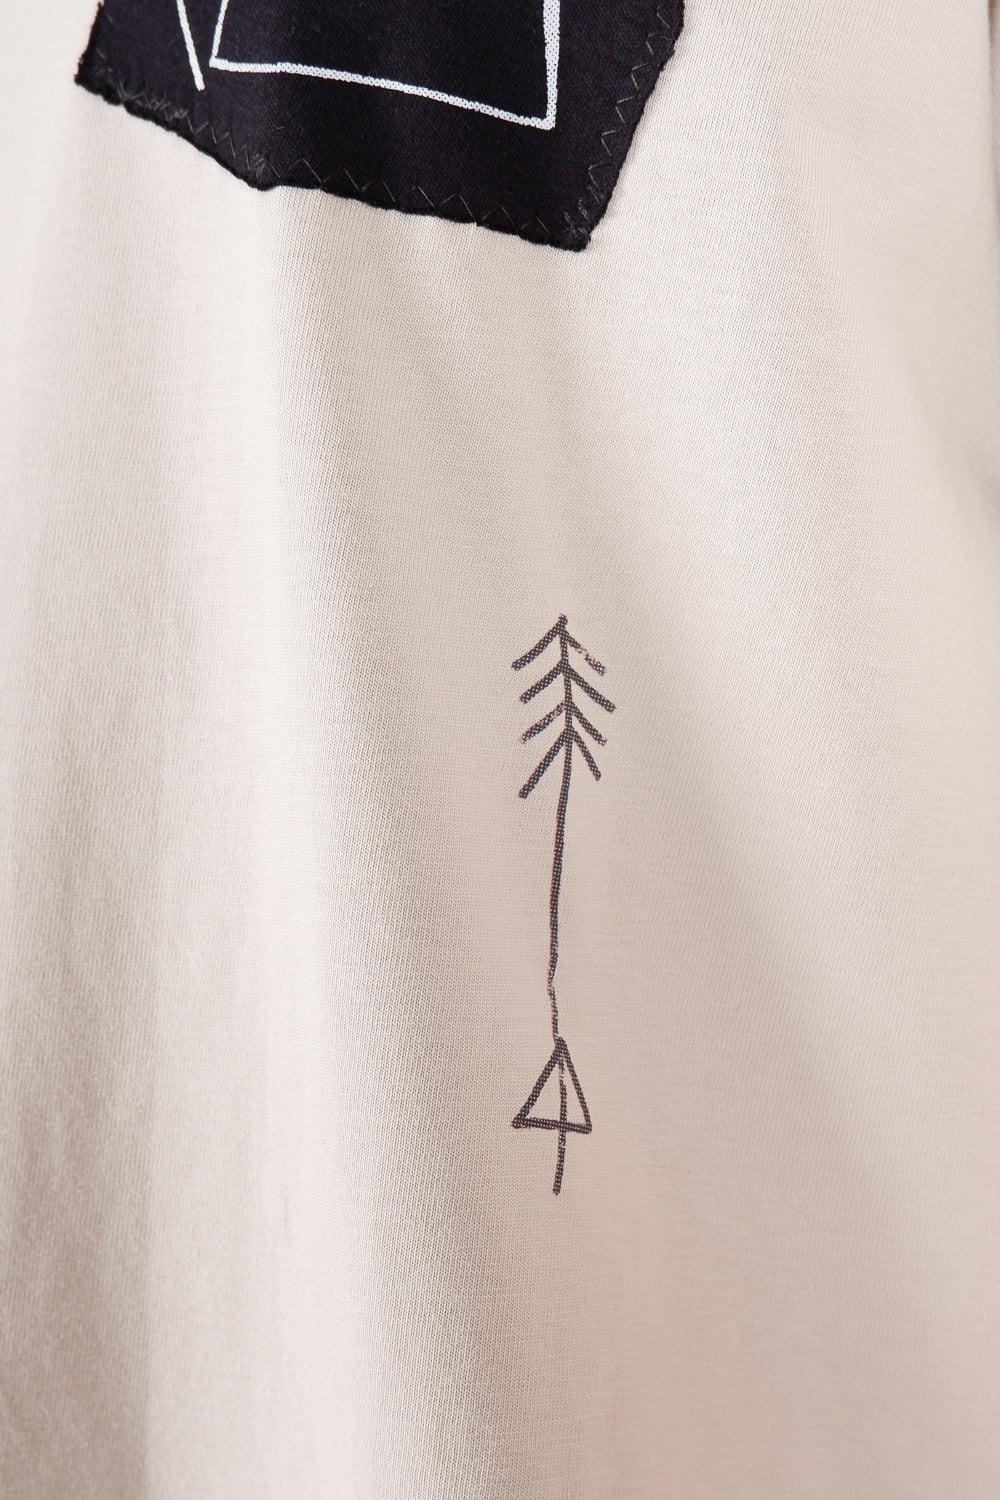 Buy the ABE Sketch T-Shirt in Sand at Intro. Spend £50 for free UK delivery. Official stockists. We ship worldwide.